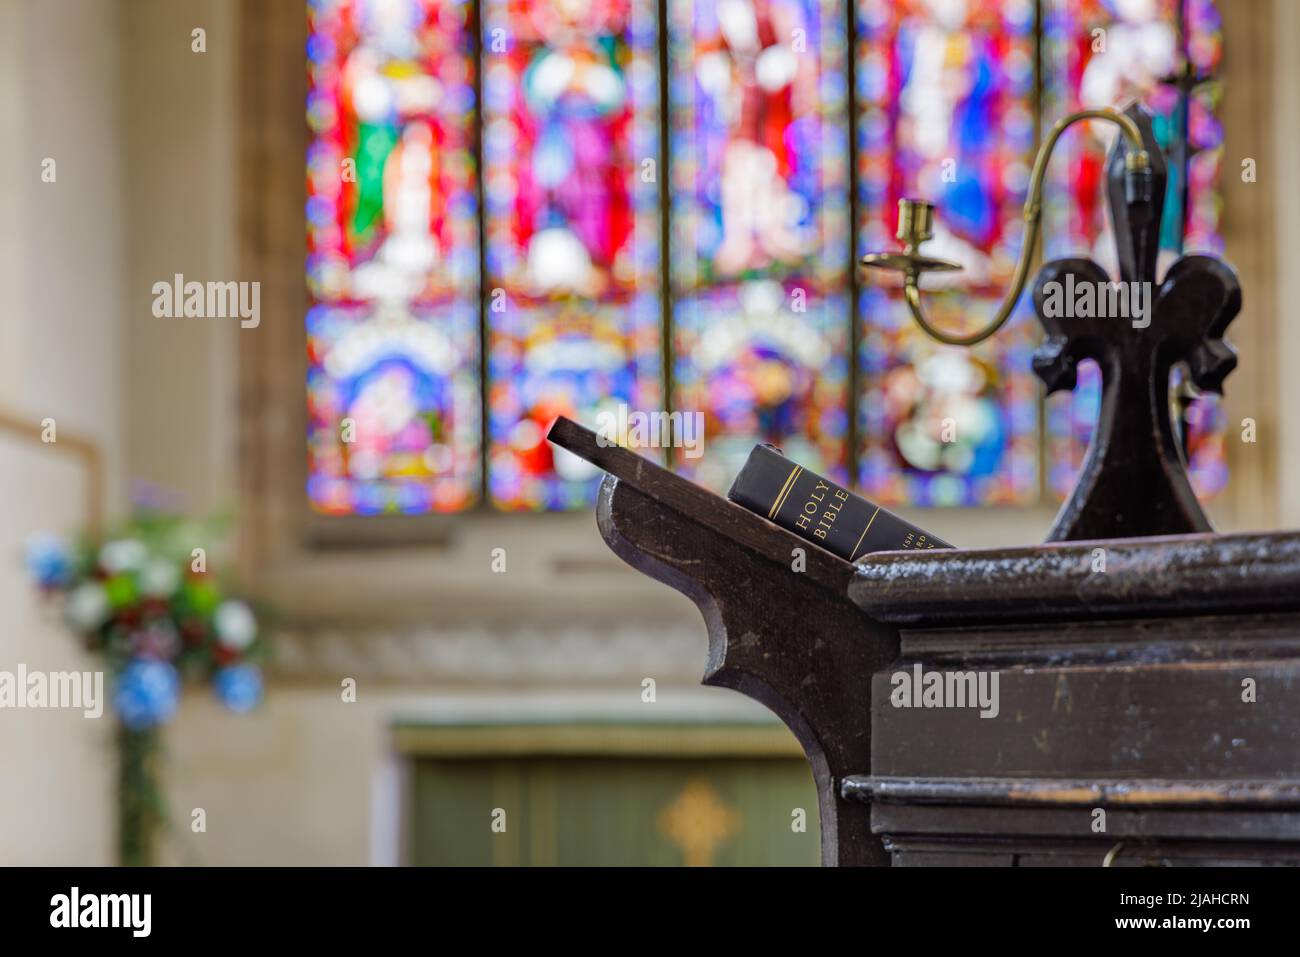 Crick, Northamptonshire, UK, May 30th 2022: In front of a stained glass window a book with Holy Bible on its spine rests on a lectern in a church. Stock Photo